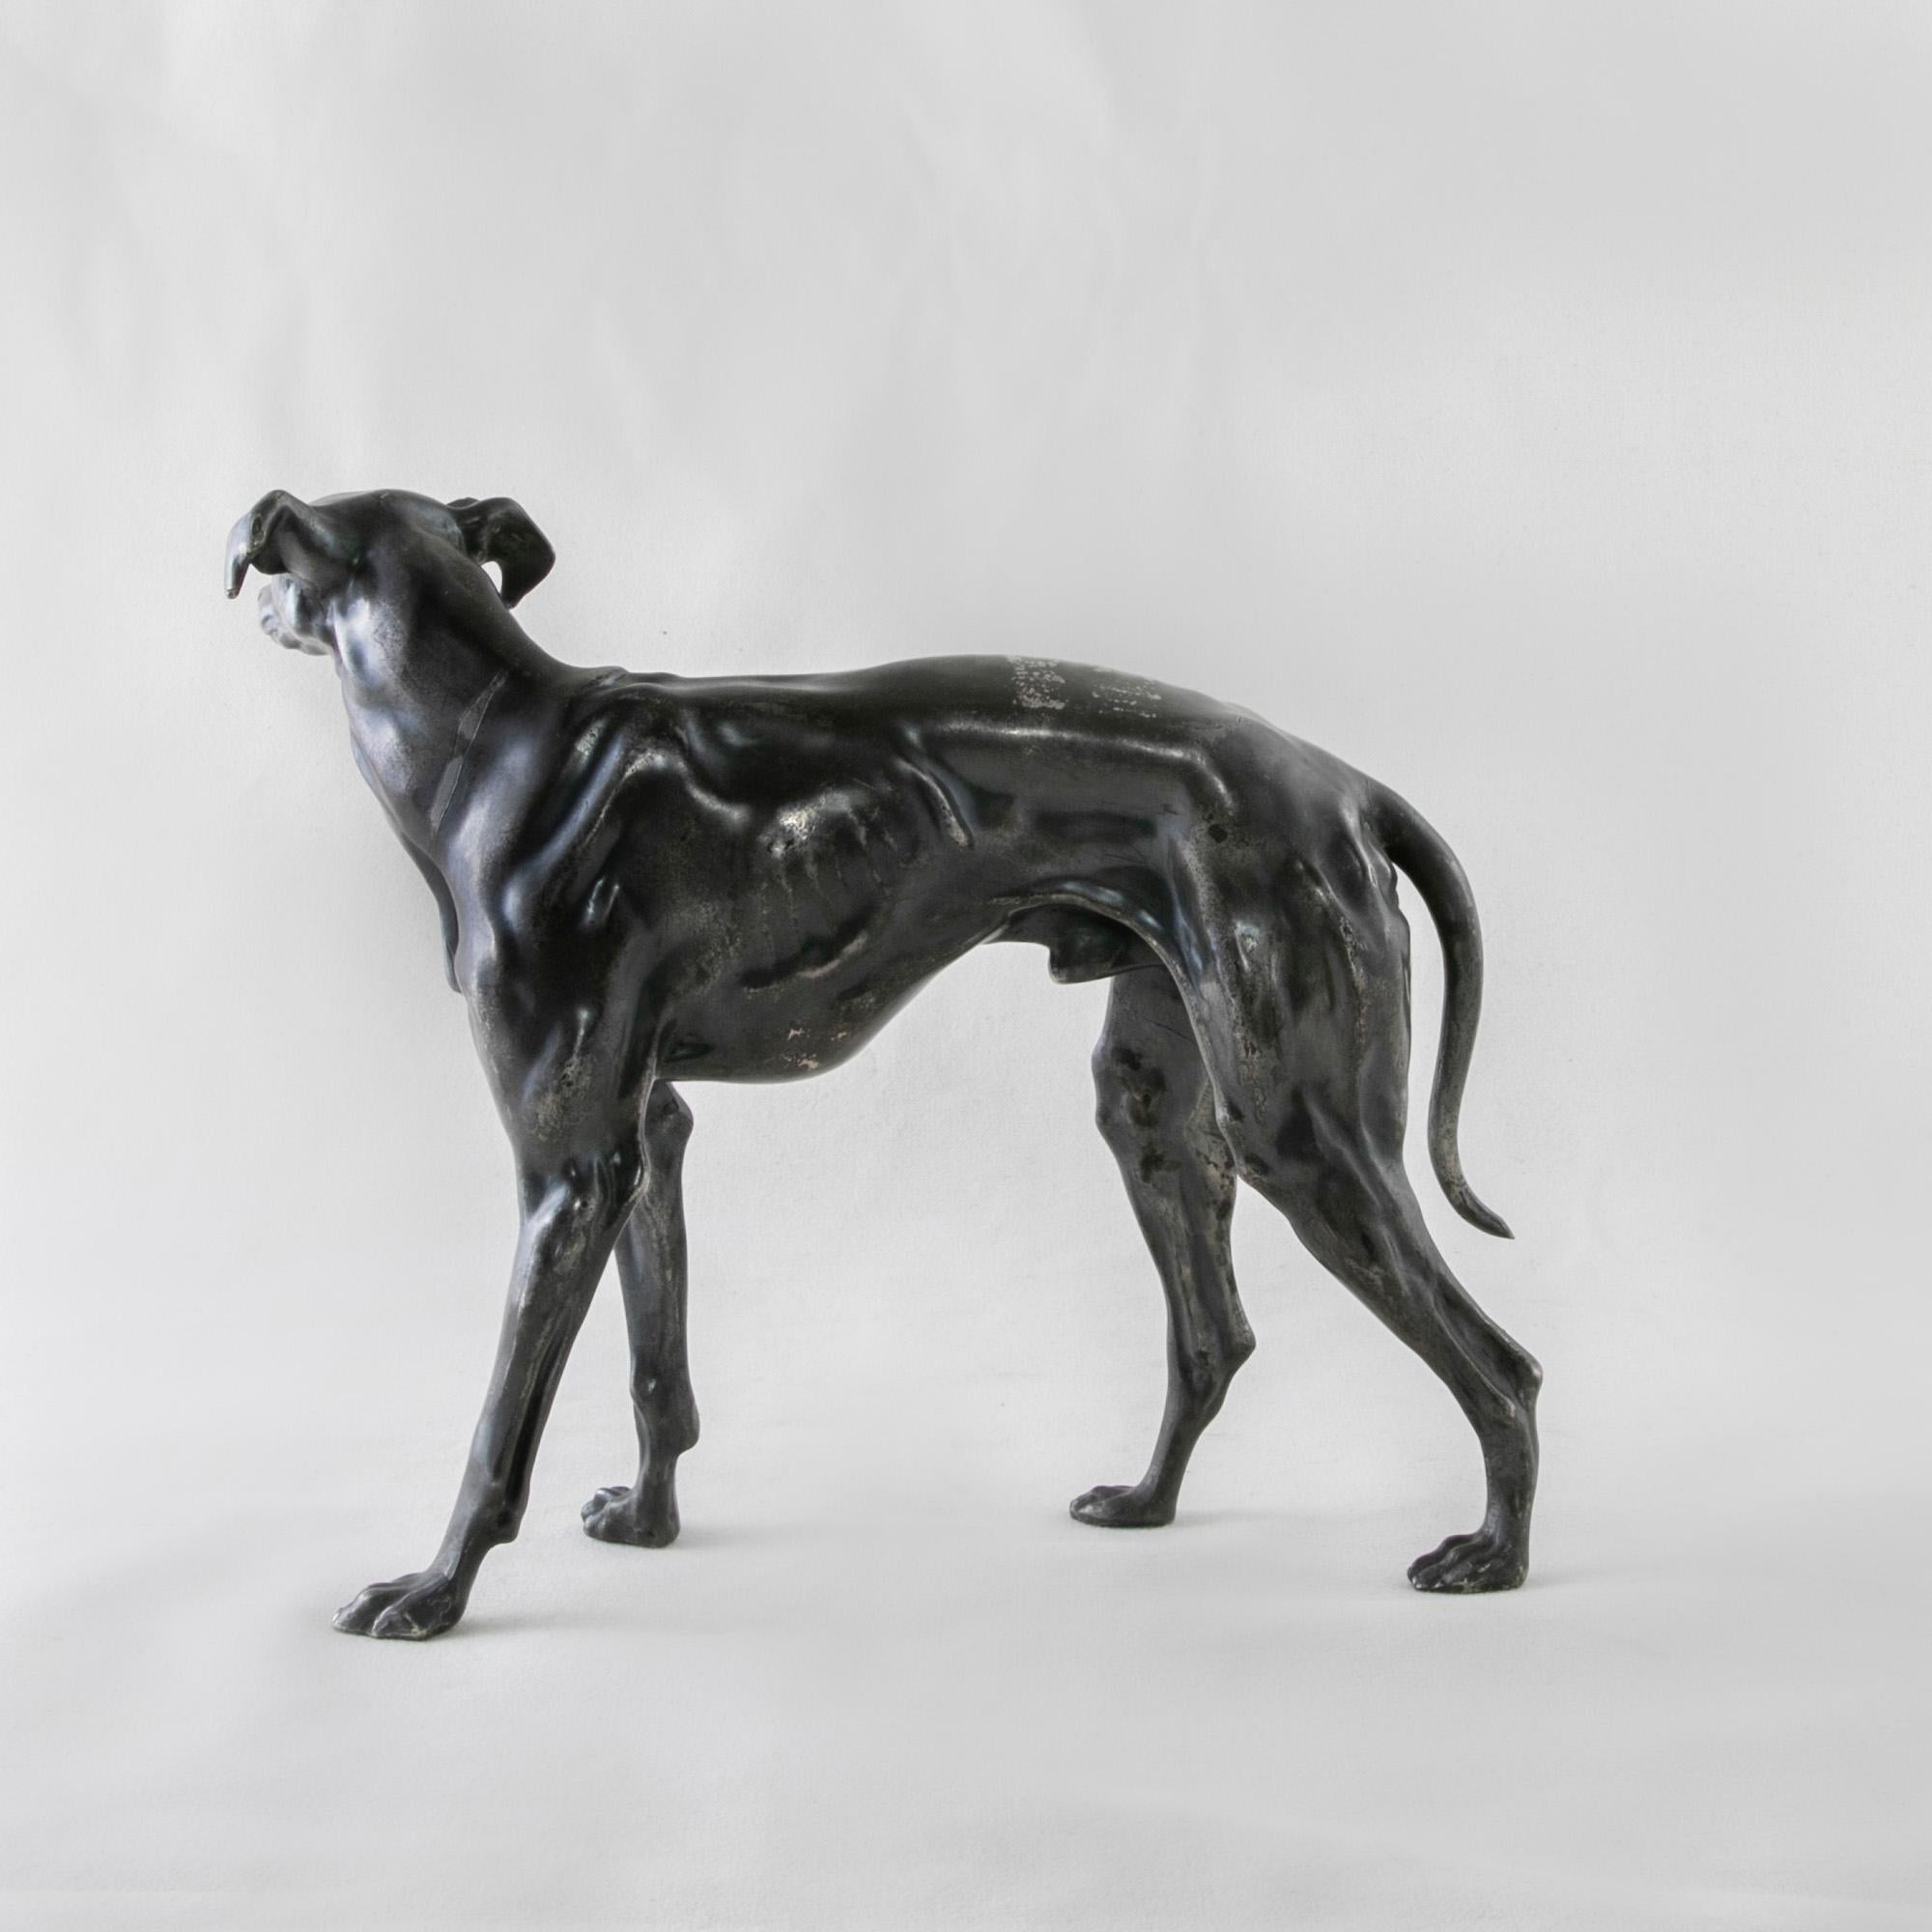 Chrome Early 20th Century French Greyhound Sculpture with Original Silver Patina